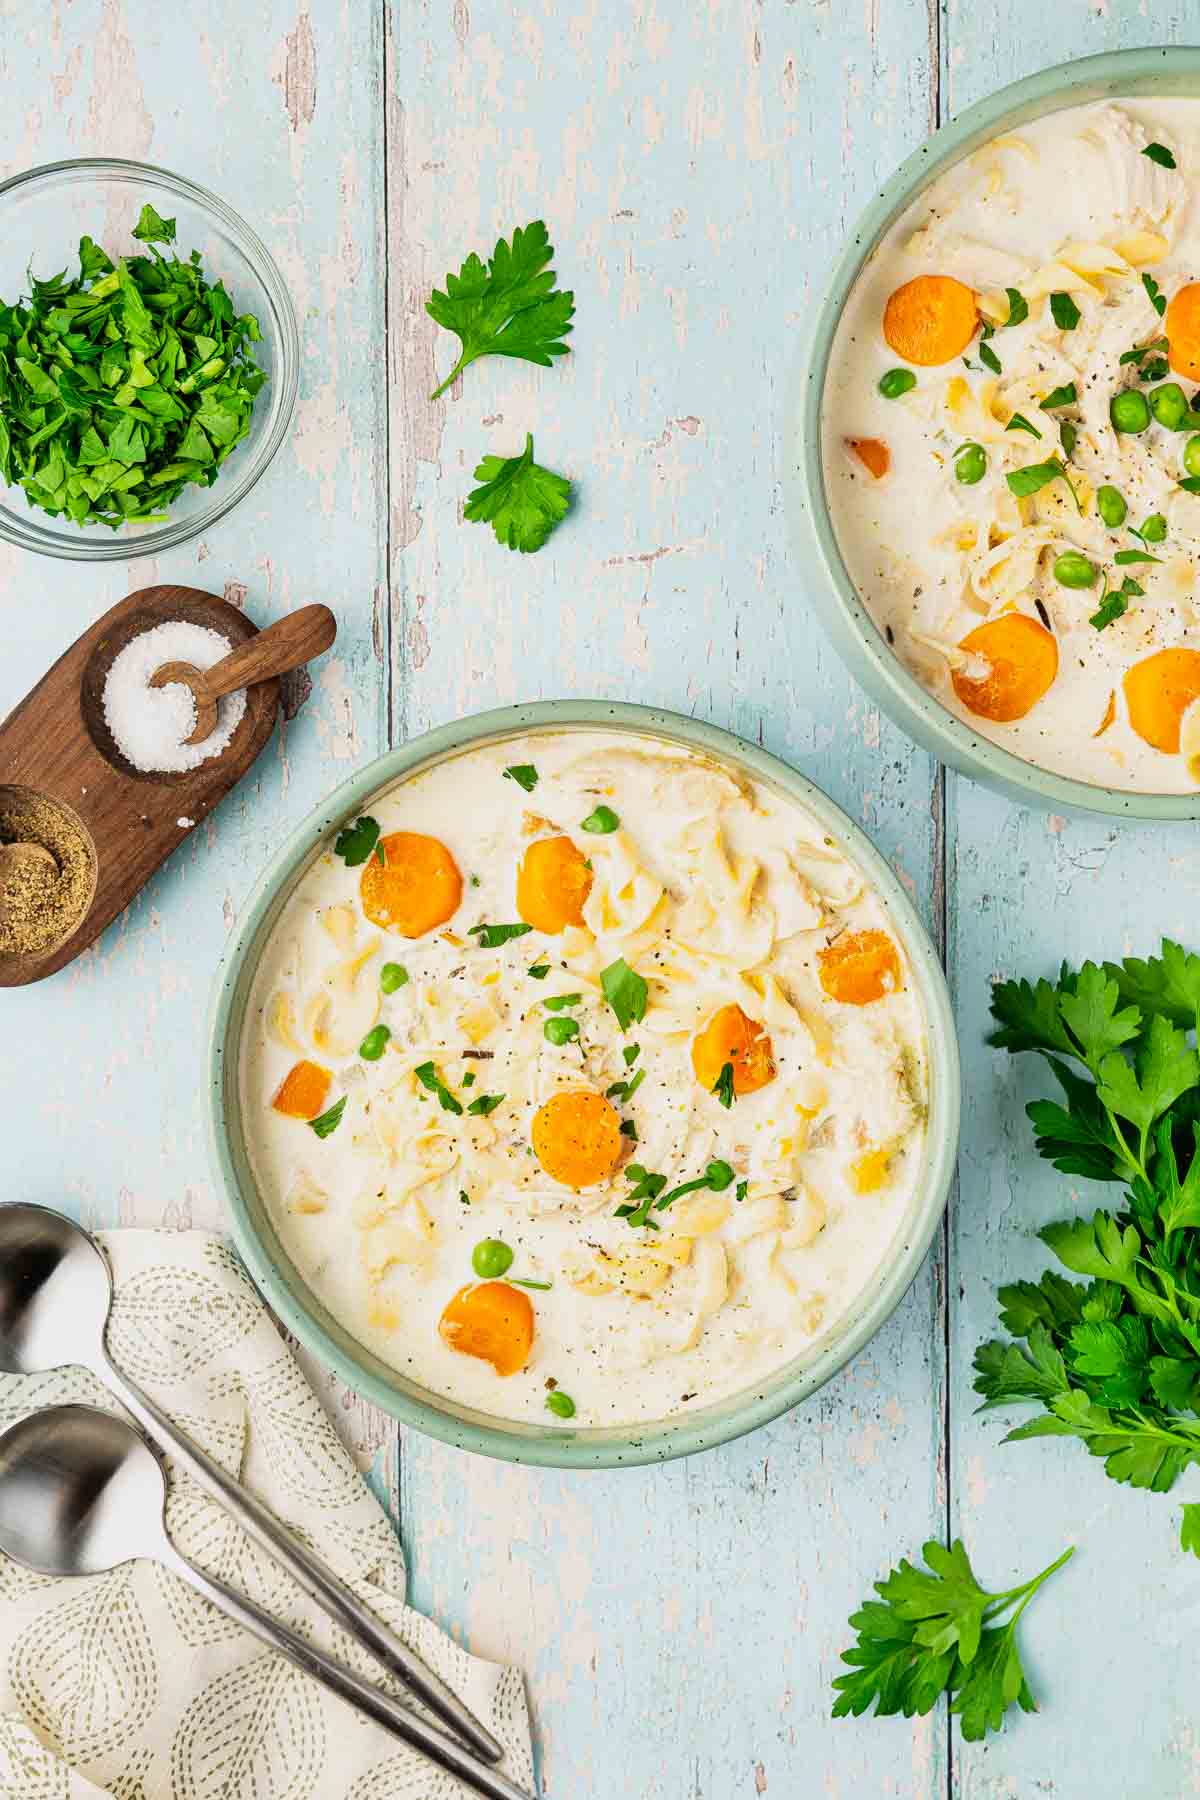 Crock Pot Creamy Chicken Noodle Soup is a hearty soup loaded with shredded chicken, veggies and egg noodles all in a creamy chicken chicken broth.